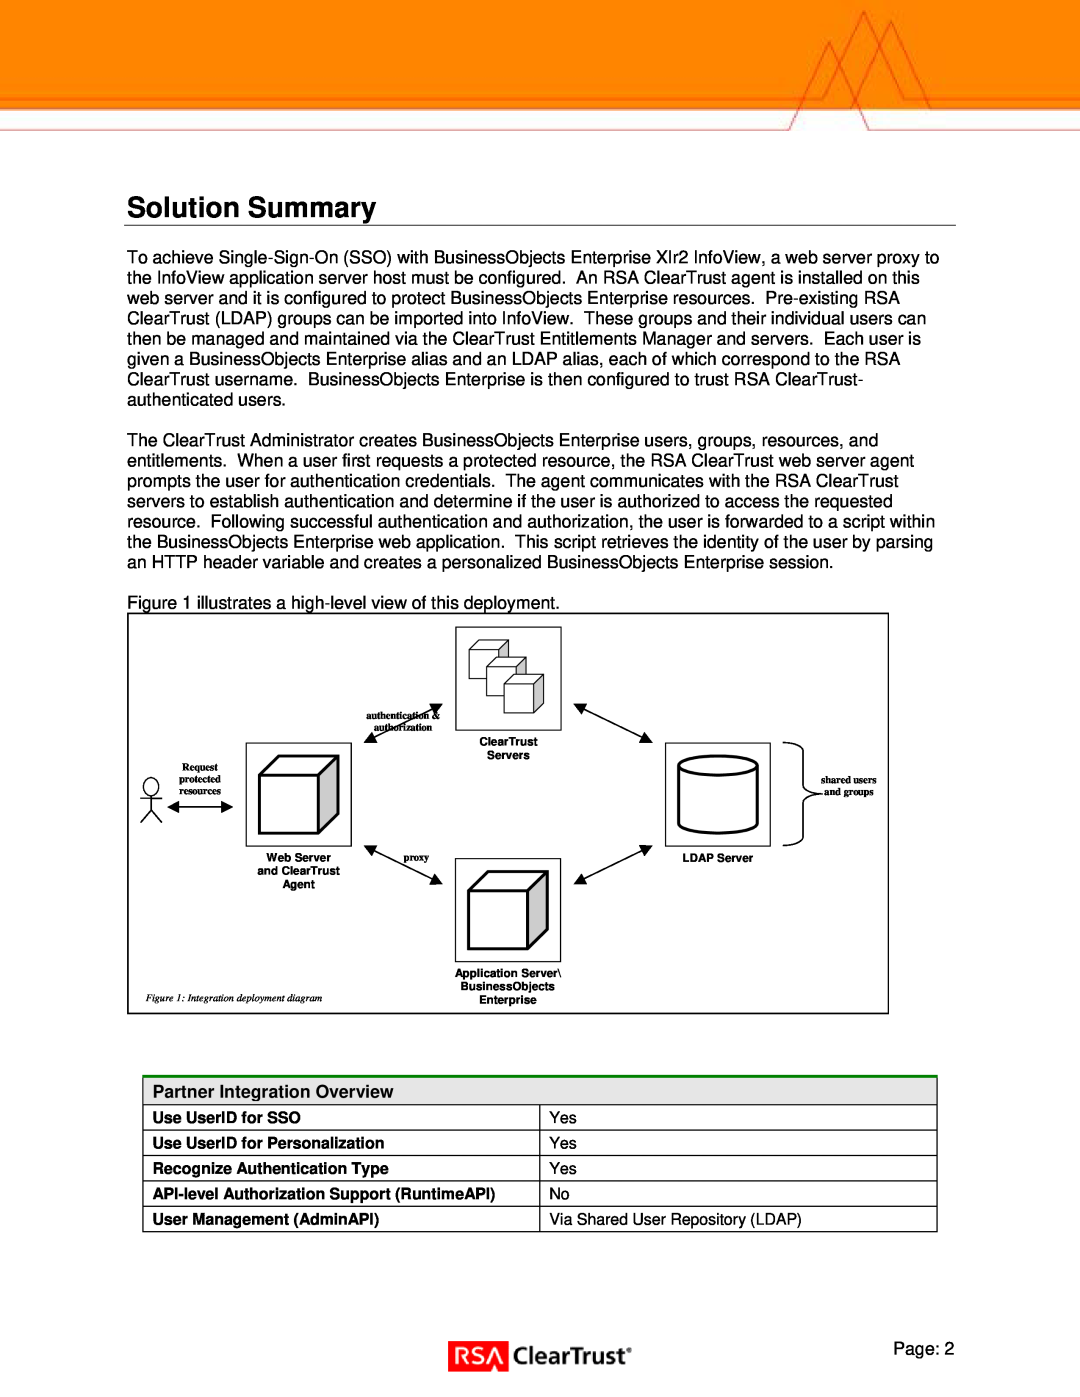 RSA Security Xlr2 manual Solution Summary, Partner Integration Overview 